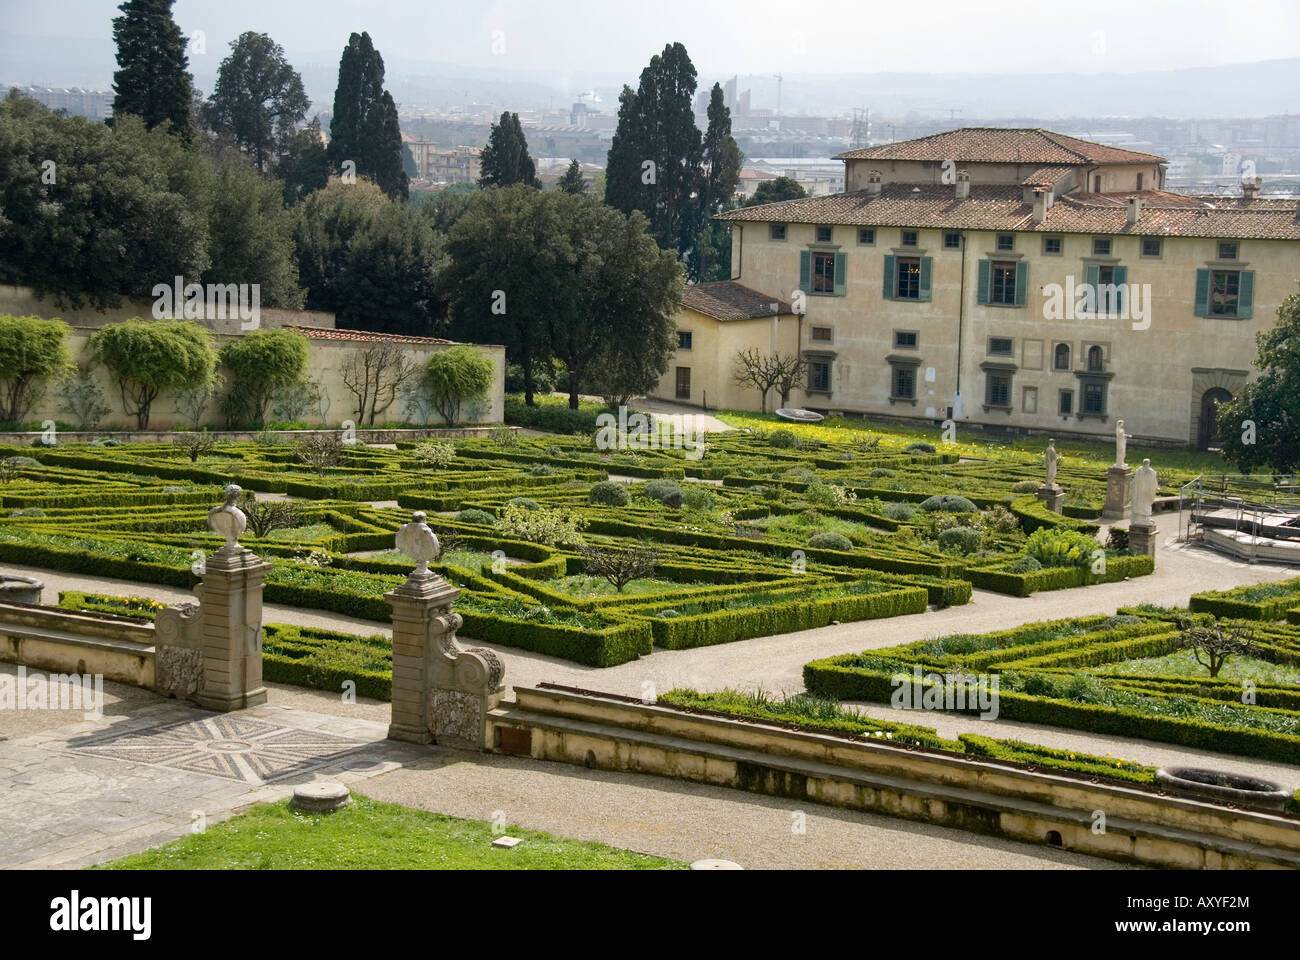 Villa Medici Castello High Resolution Stock Photography and Images - Alamy